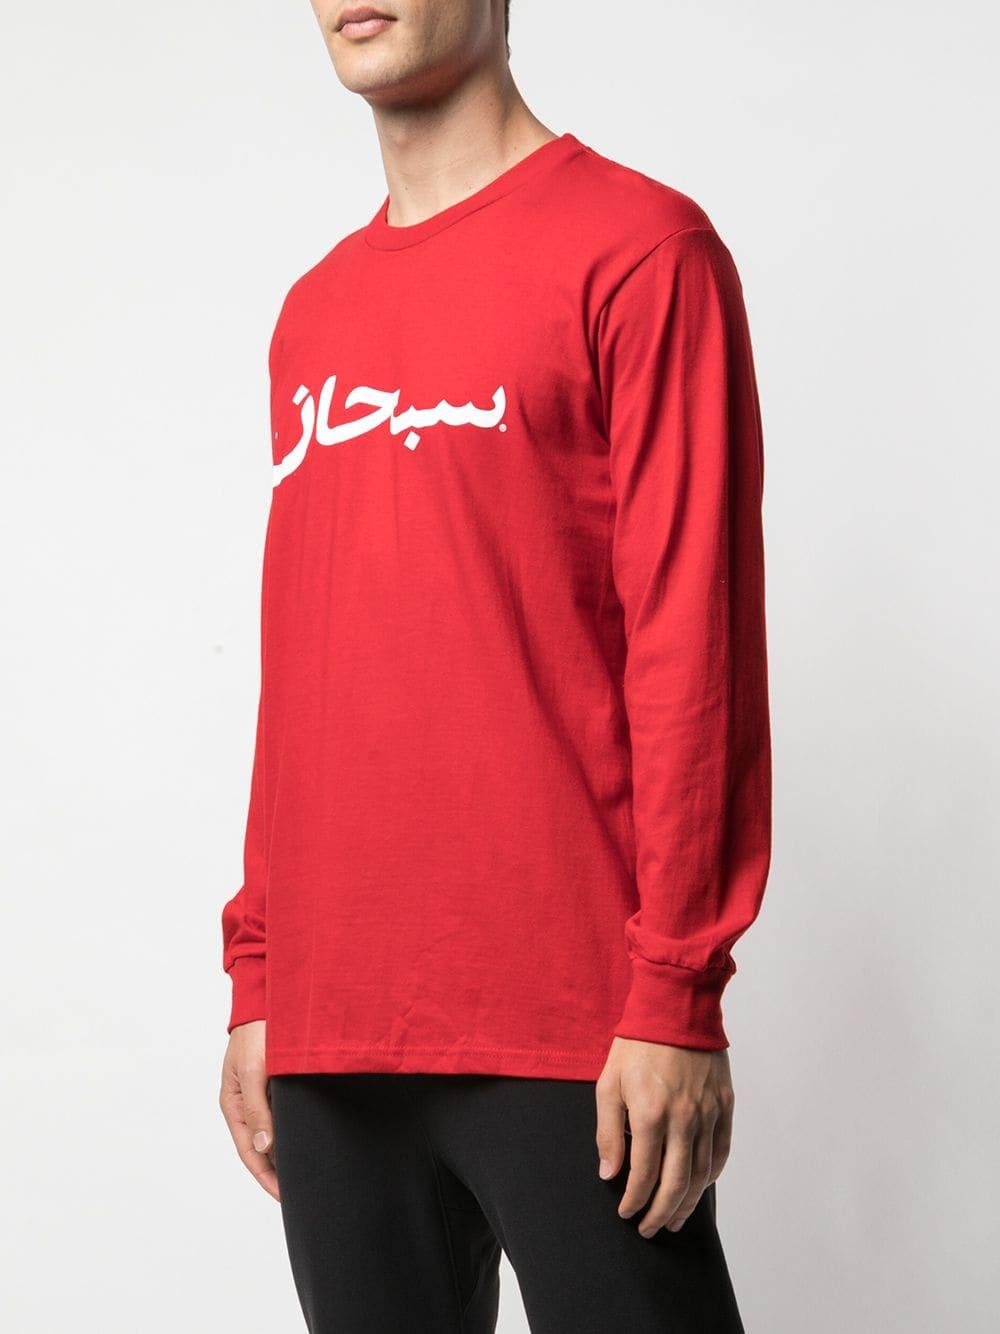 Supreme Cotton Arabic Logo L/s Tee in Red for Men - Lyst